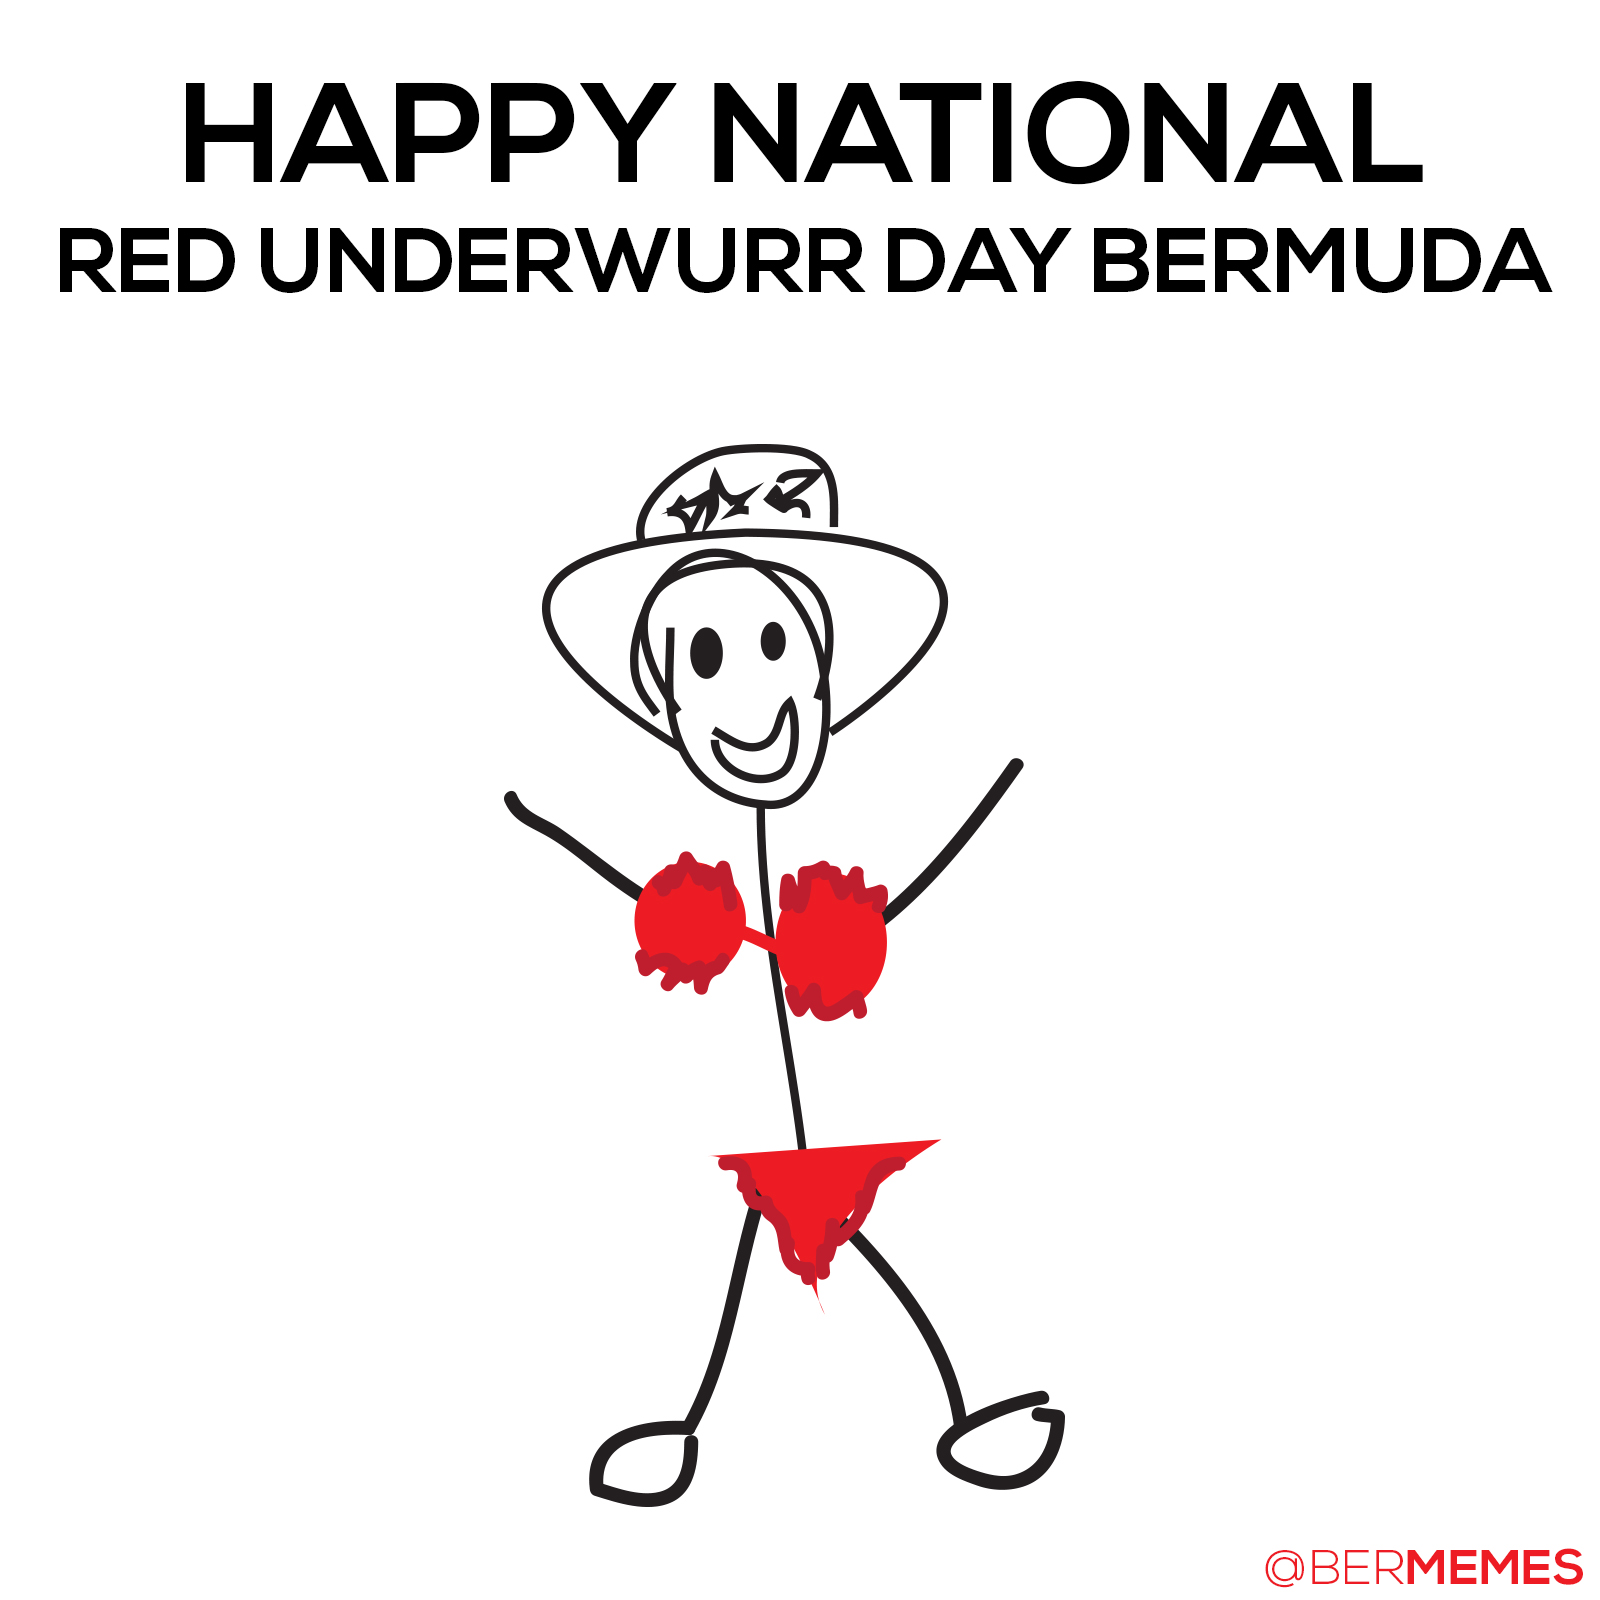 Today is Red Underwear Day!